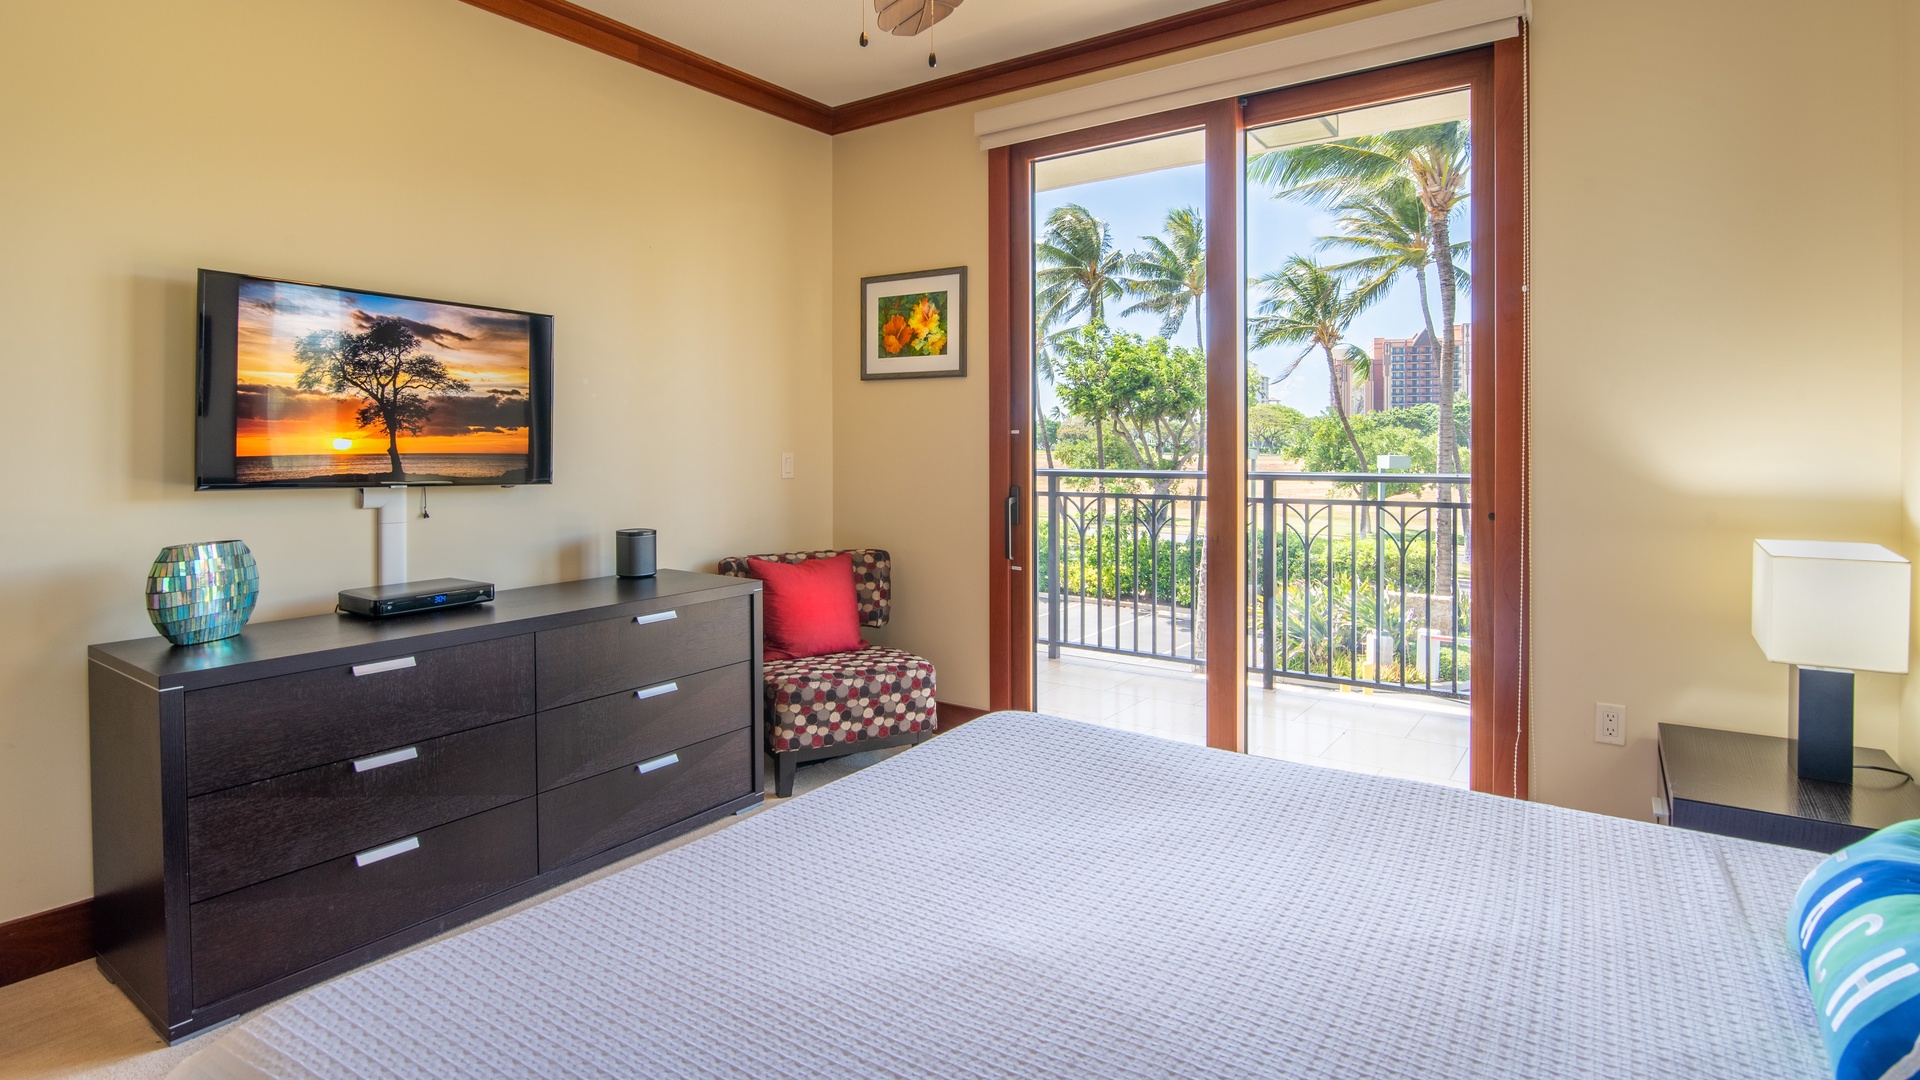 Kapolei Vacation Rentals, Ko Olina Beach Villas O210 - The primary guest bedroom with lanai access and TV.